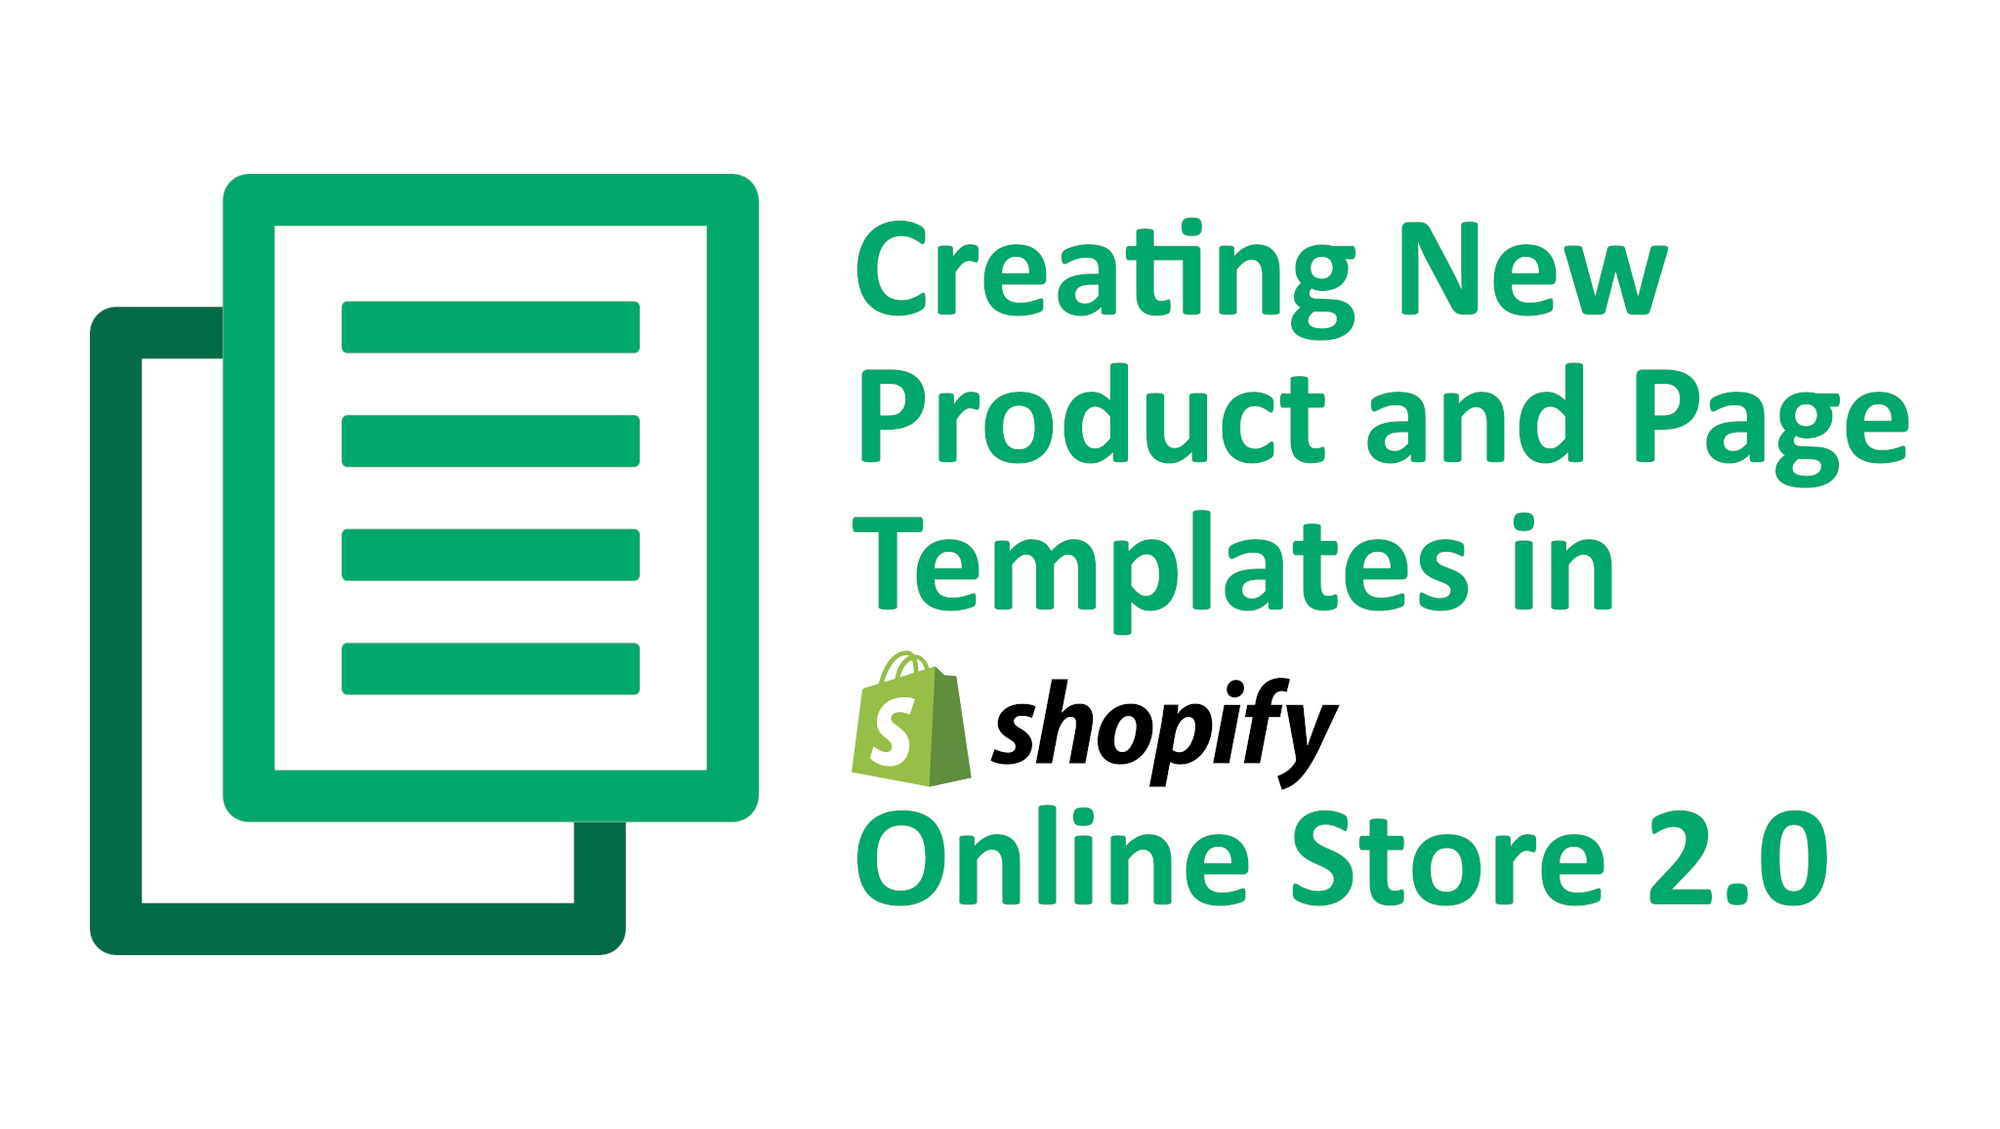 Make New Product and Page Templates